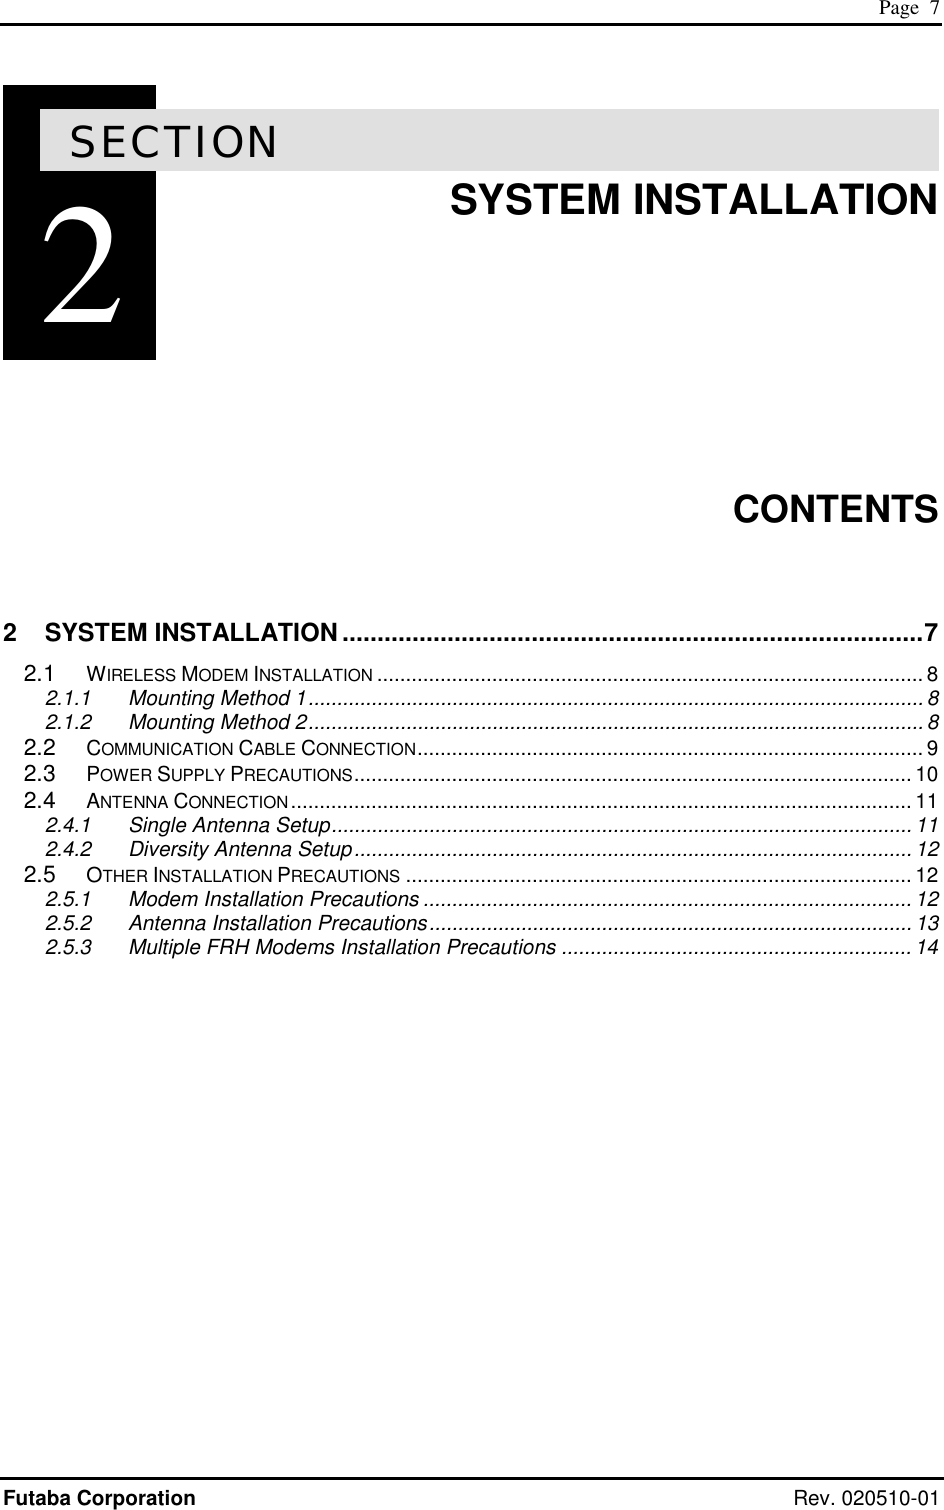  Page  7 Futaba Corporation Rev. 020510-01 2SECTION 2  SYSTEM INSTALLATION        CONTENTS  2 SYSTEM INSTALLATION ...................................................................................7 2.1 WIRELESS MODEM INSTALLATION ............................................................................................... 8 2.1.1 Mounting Method 1........................................................................................................... 8 2.1.2 Mounting Method 2........................................................................................................... 8 2.2 COMMUNICATION CABLE CONNECTION........................................................................................ 9 2.3 POWER SUPPLY PRECAUTIONS................................................................................................. 10 2.4 ANTENNA CONNECTION............................................................................................................ 11 2.4.1 Single Antenna Setup..................................................................................................... 11 2.4.2 Diversity Antenna Setup................................................................................................. 12 2.5 OTHER INSTALLATION PRECAUTIONS ........................................................................................ 12 2.5.1 Modem Installation Precautions ..................................................................................... 12 2.5.2 Antenna Installation Precautions.................................................................................... 13 2.5.3 Multiple FRH Modems Installation Precautions ............................................................. 14   